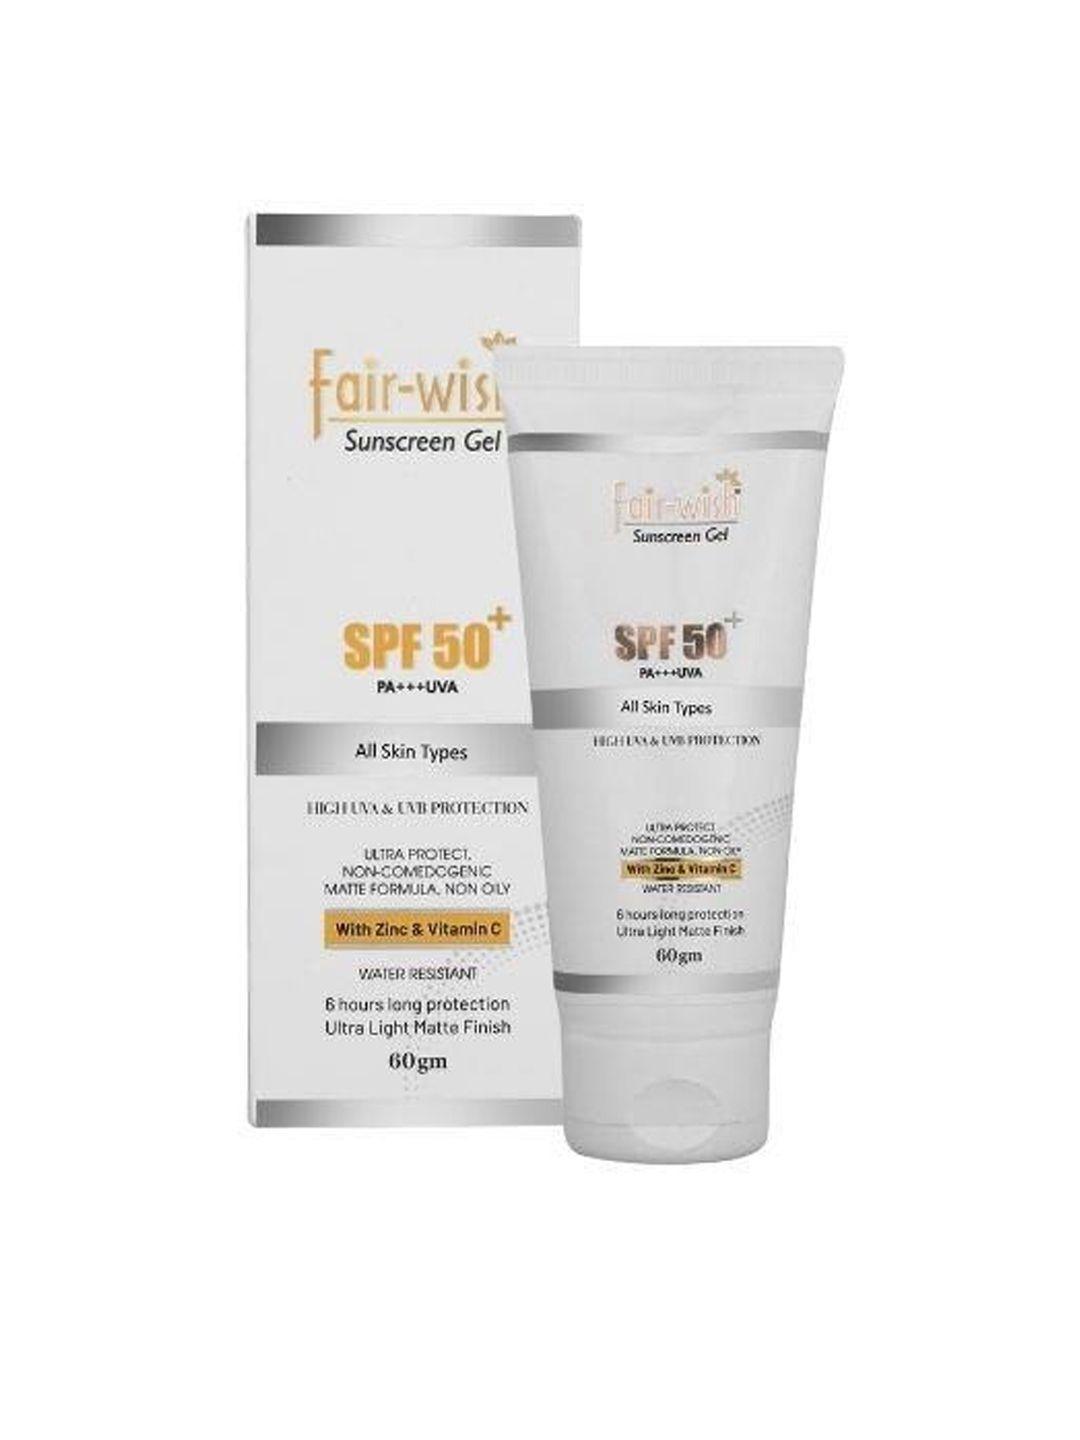 fair wish sunscreen spf50 pa+++ uva with vitamin c & zinc for all skin types - 60g